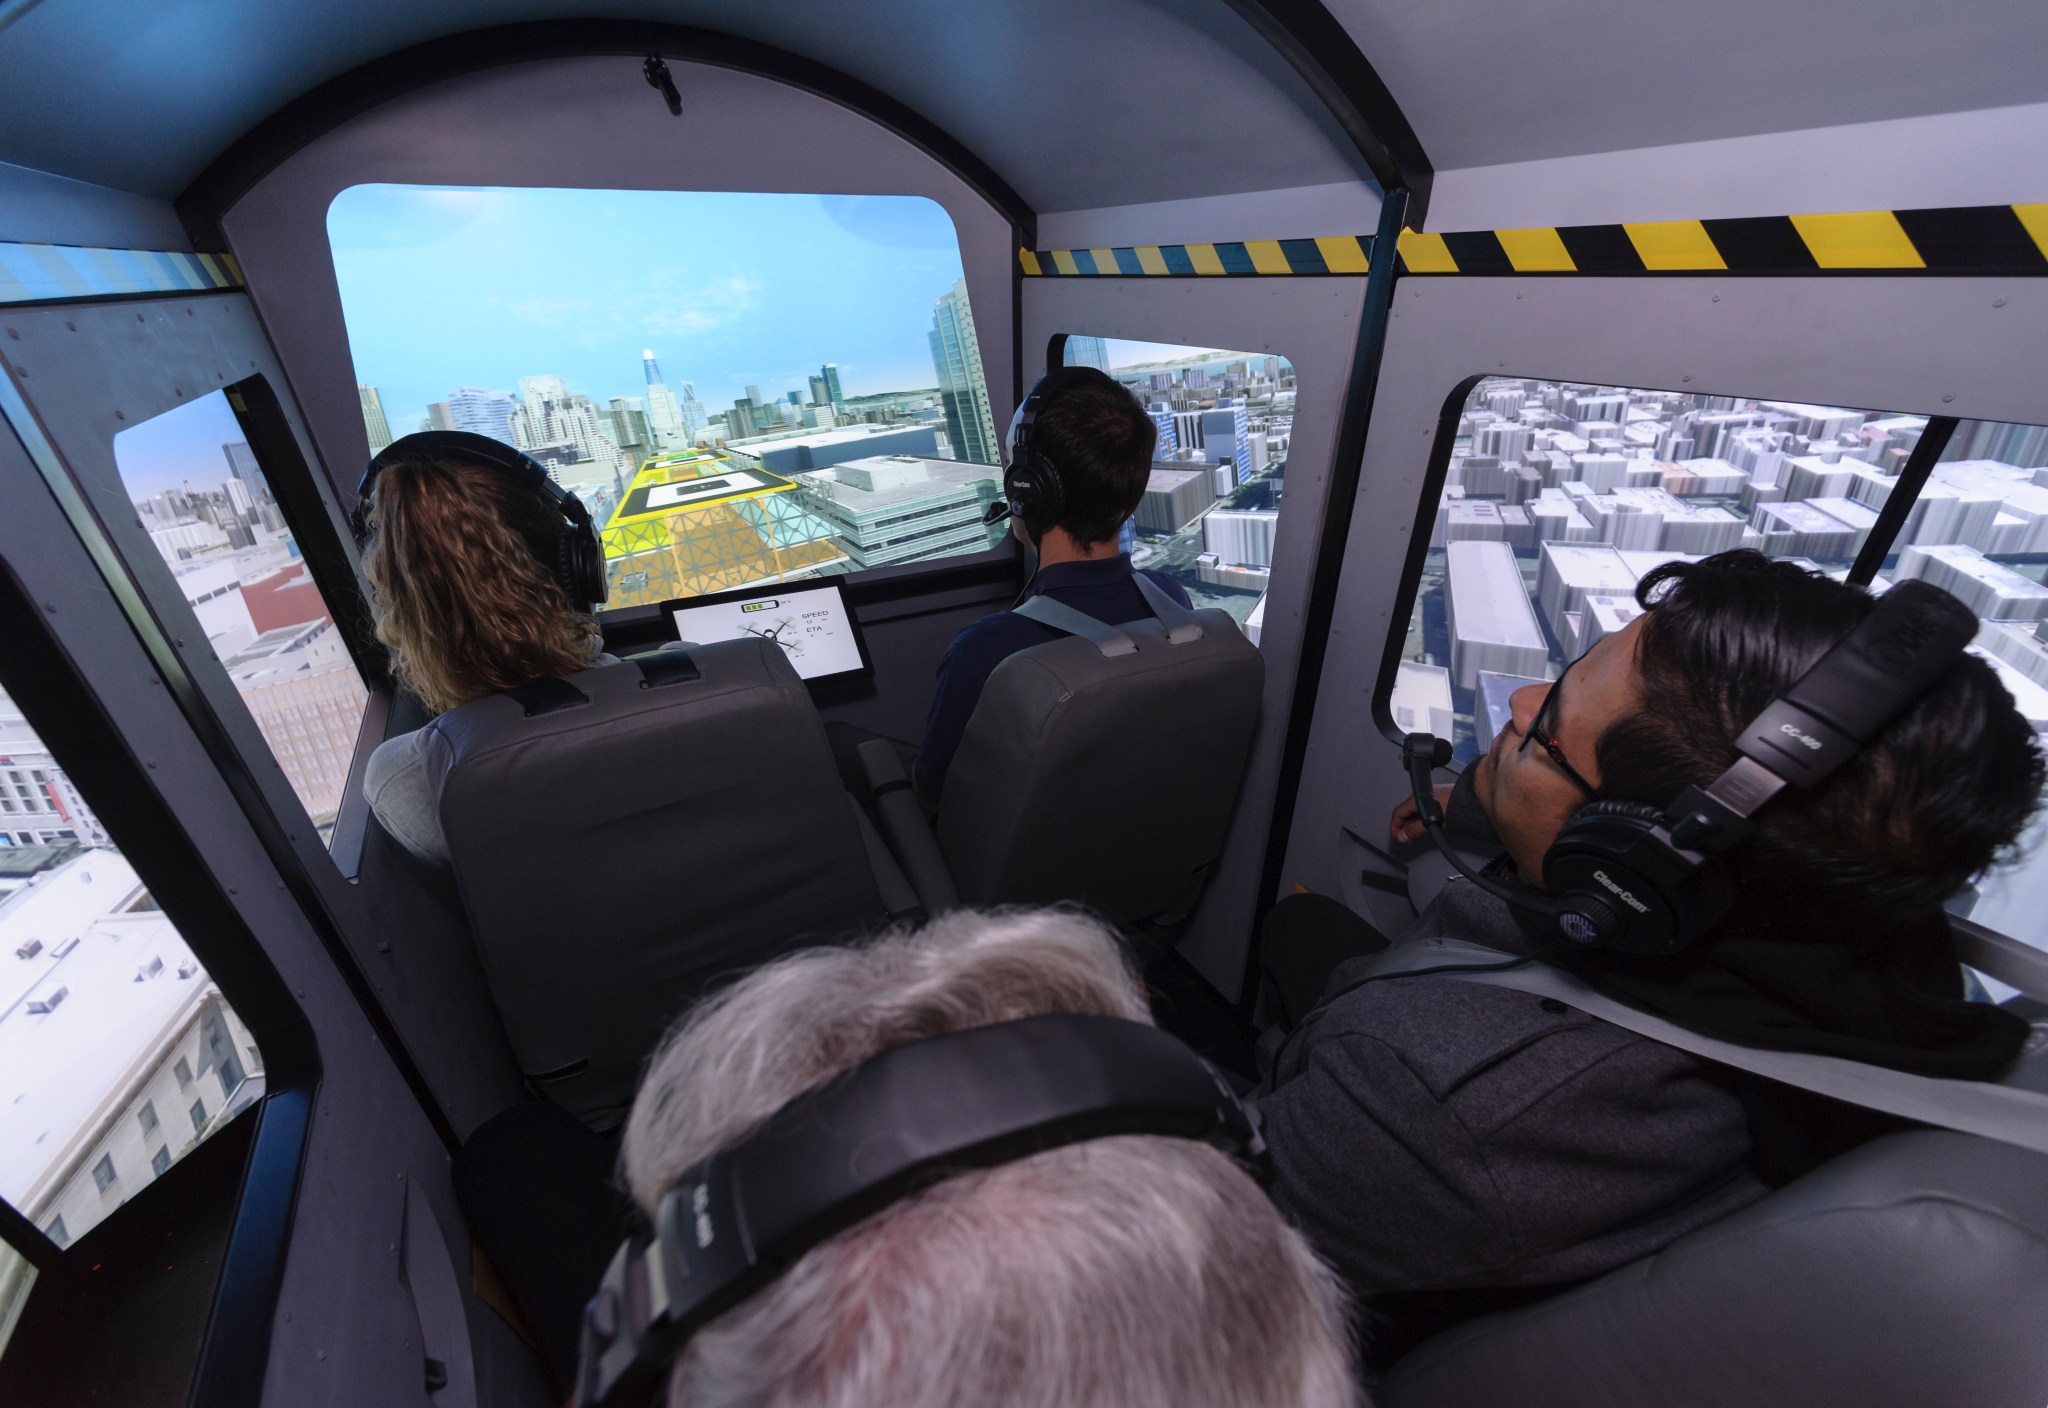 Four passengers look out the simulated windows of an air taxi cab inside the Vertical Motion Simulator at Ames.